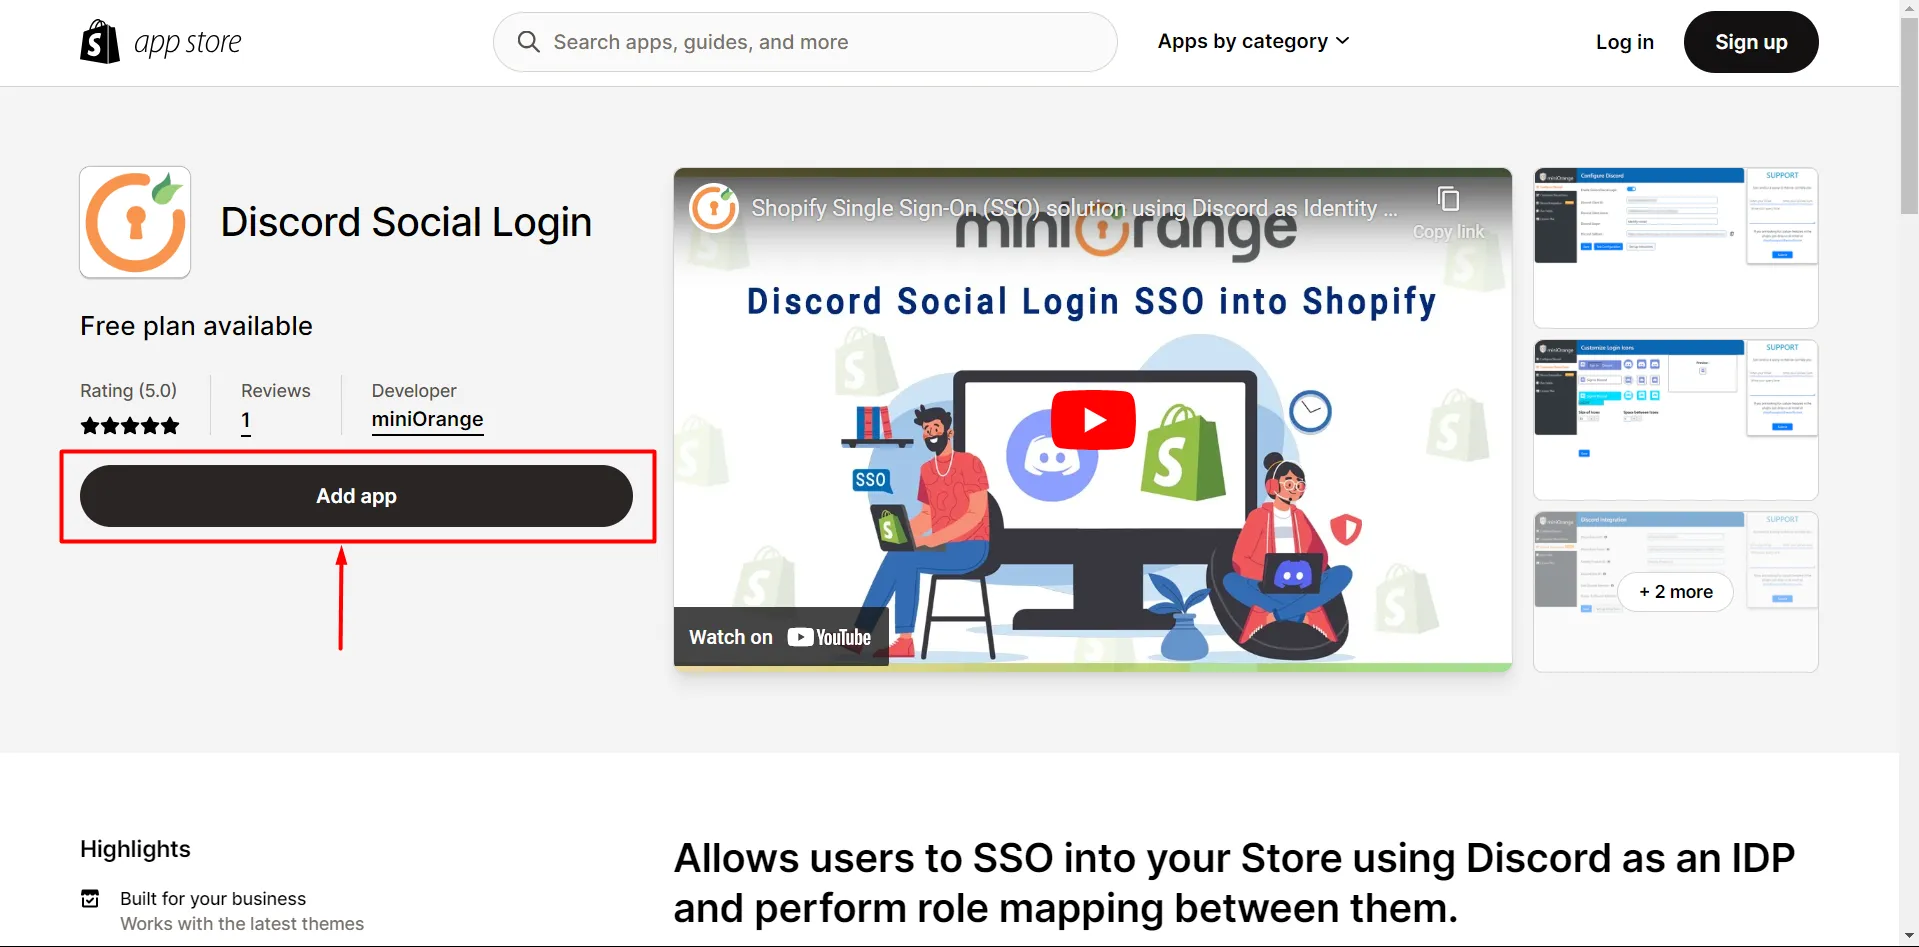 Shopify Discord SSO login - Shopify Discord Role Mapping -  Navigate to Discord App